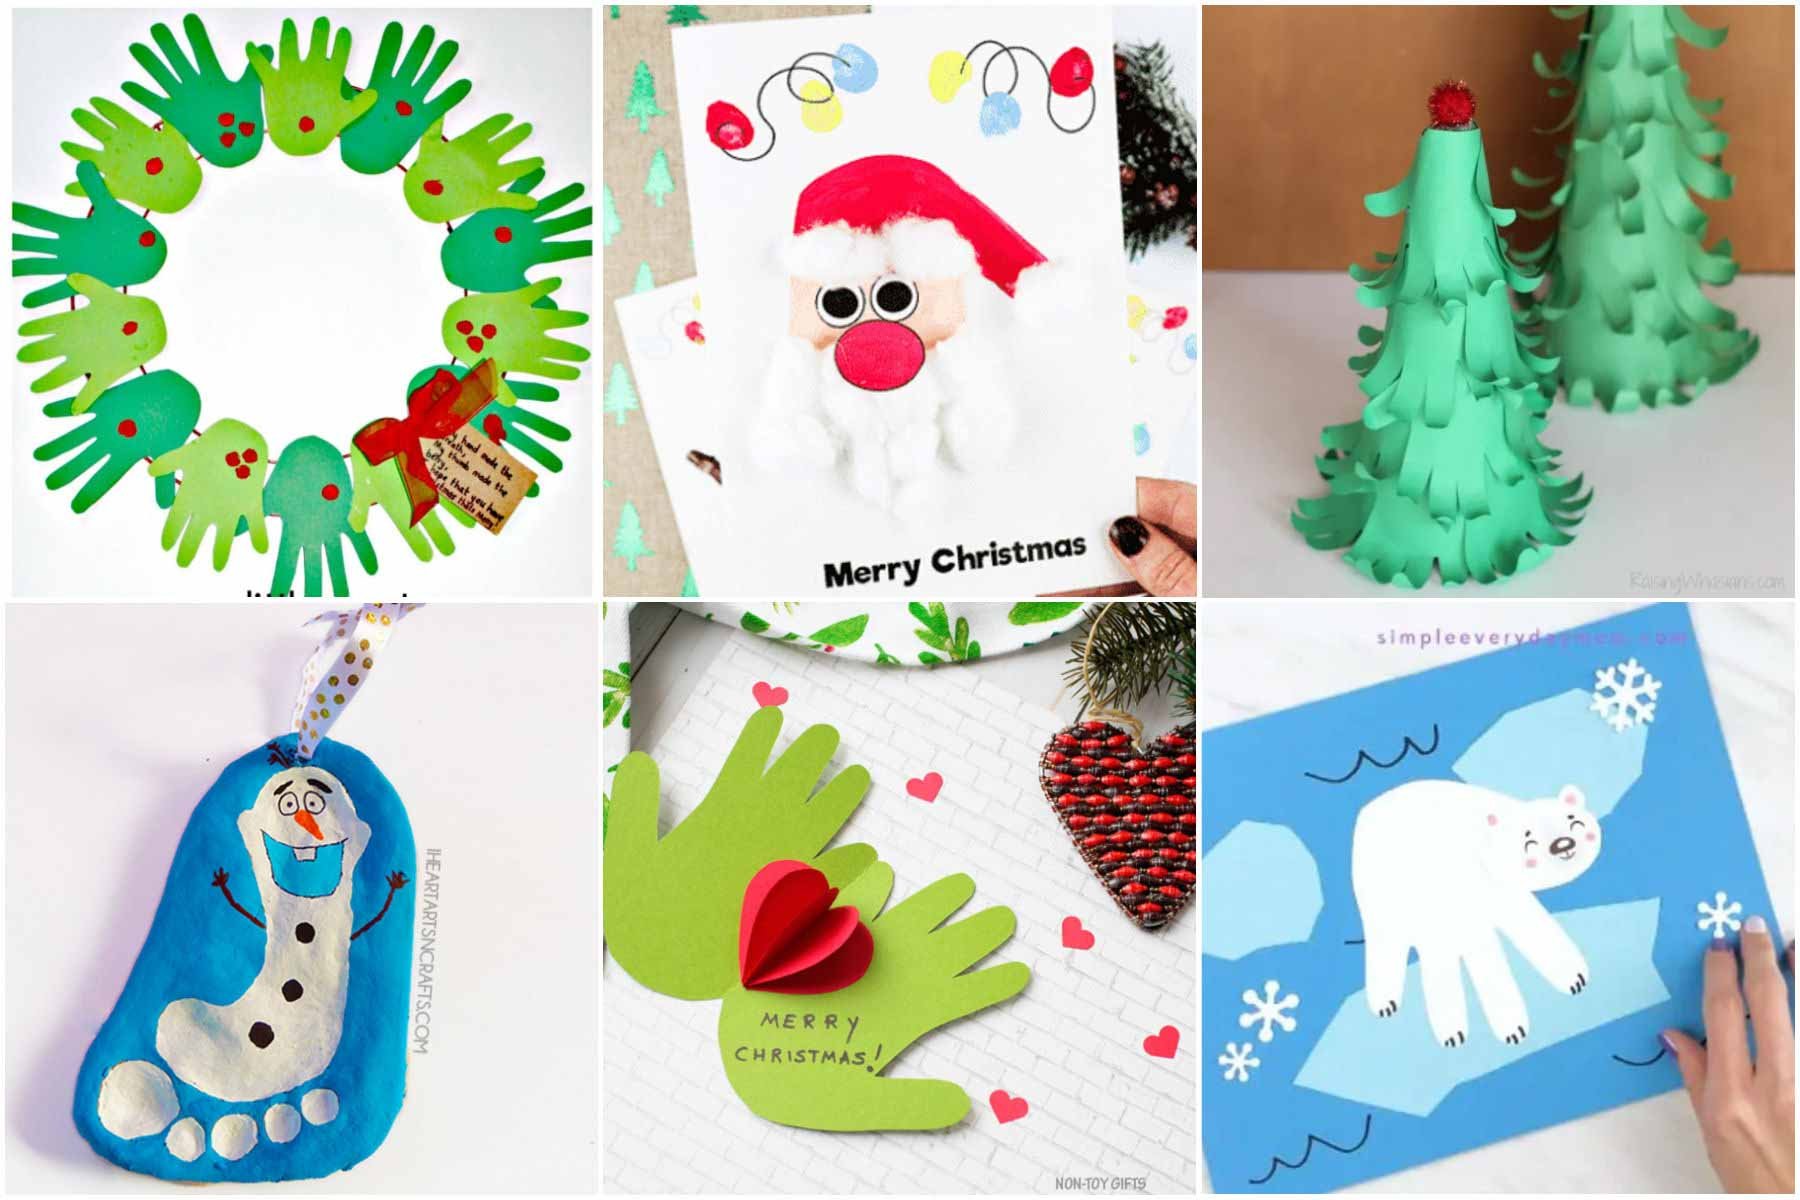 Festive DIY Christmas Crafts for All Ages - The Crazy Craft Lady